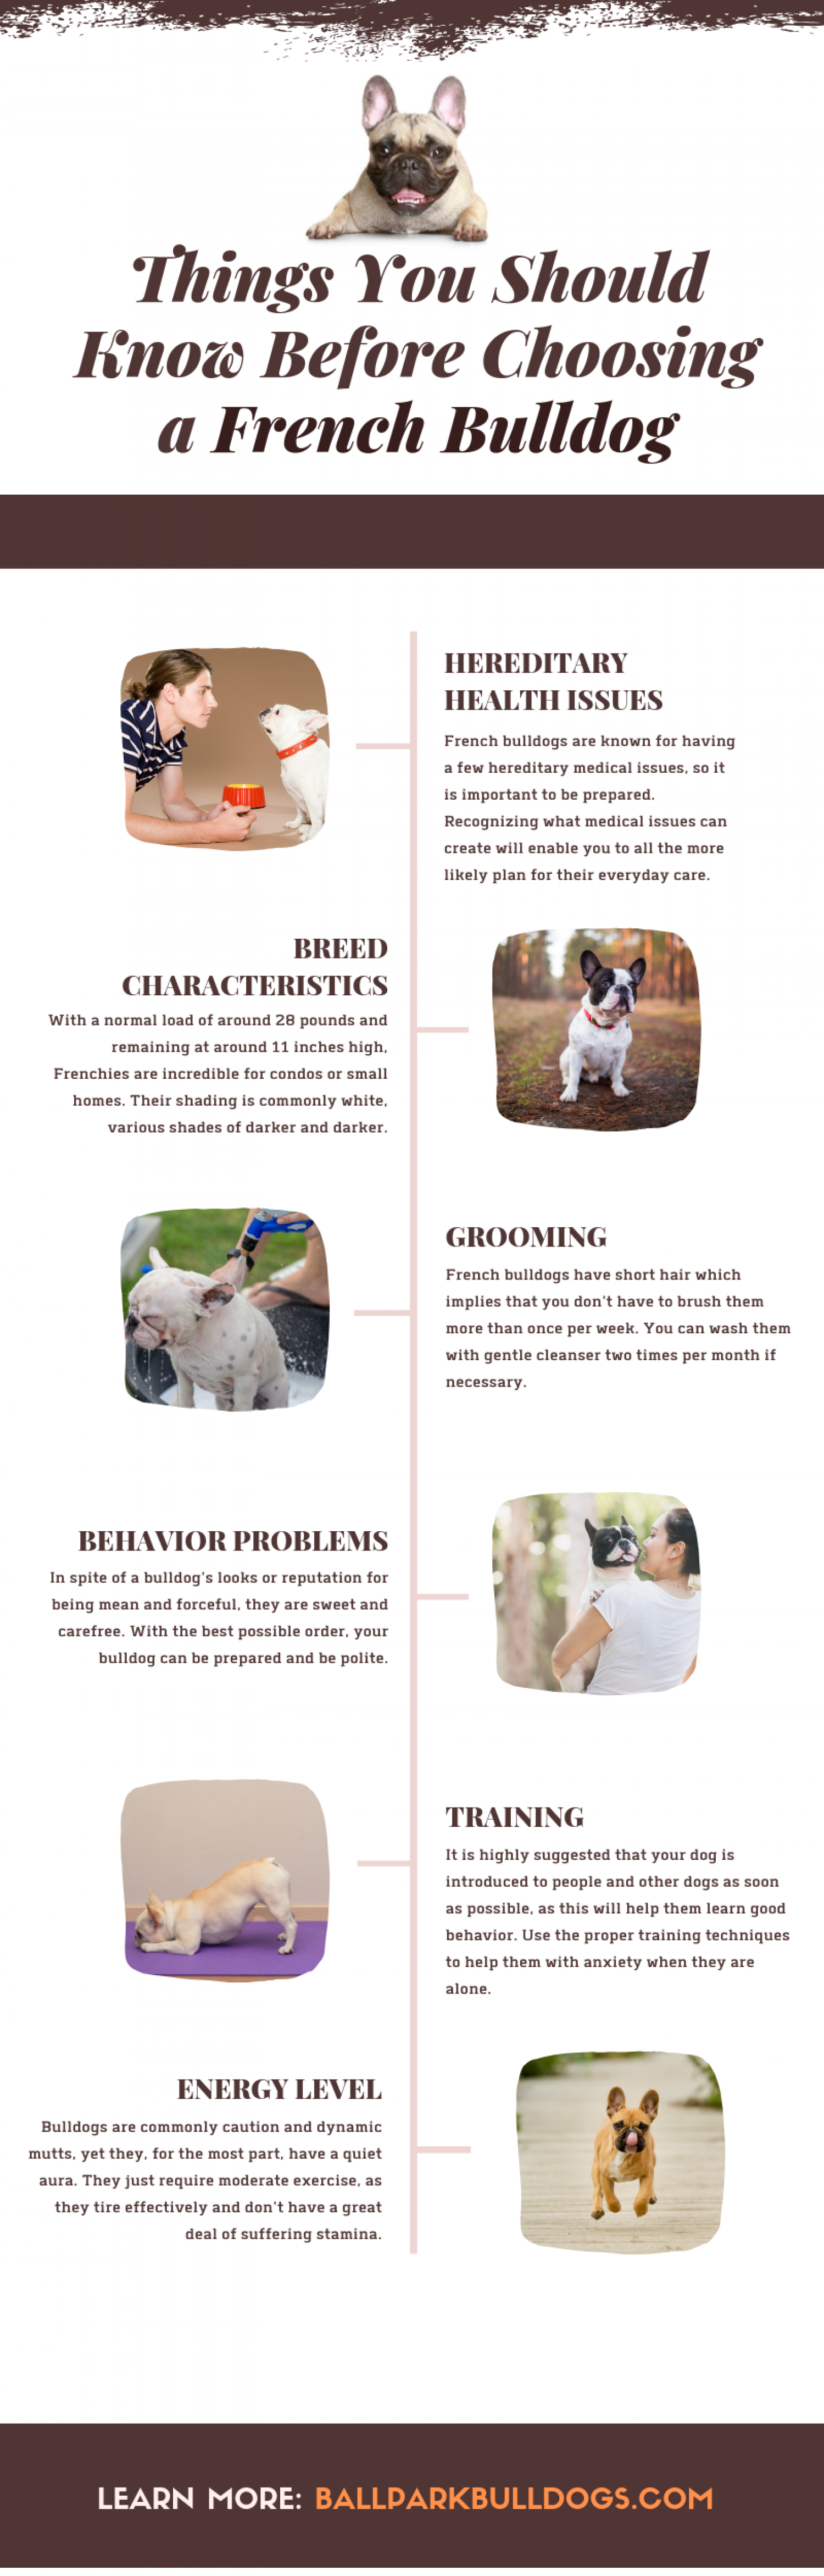 Things You Should Know Before Choosing a French Bulldog  Infographic